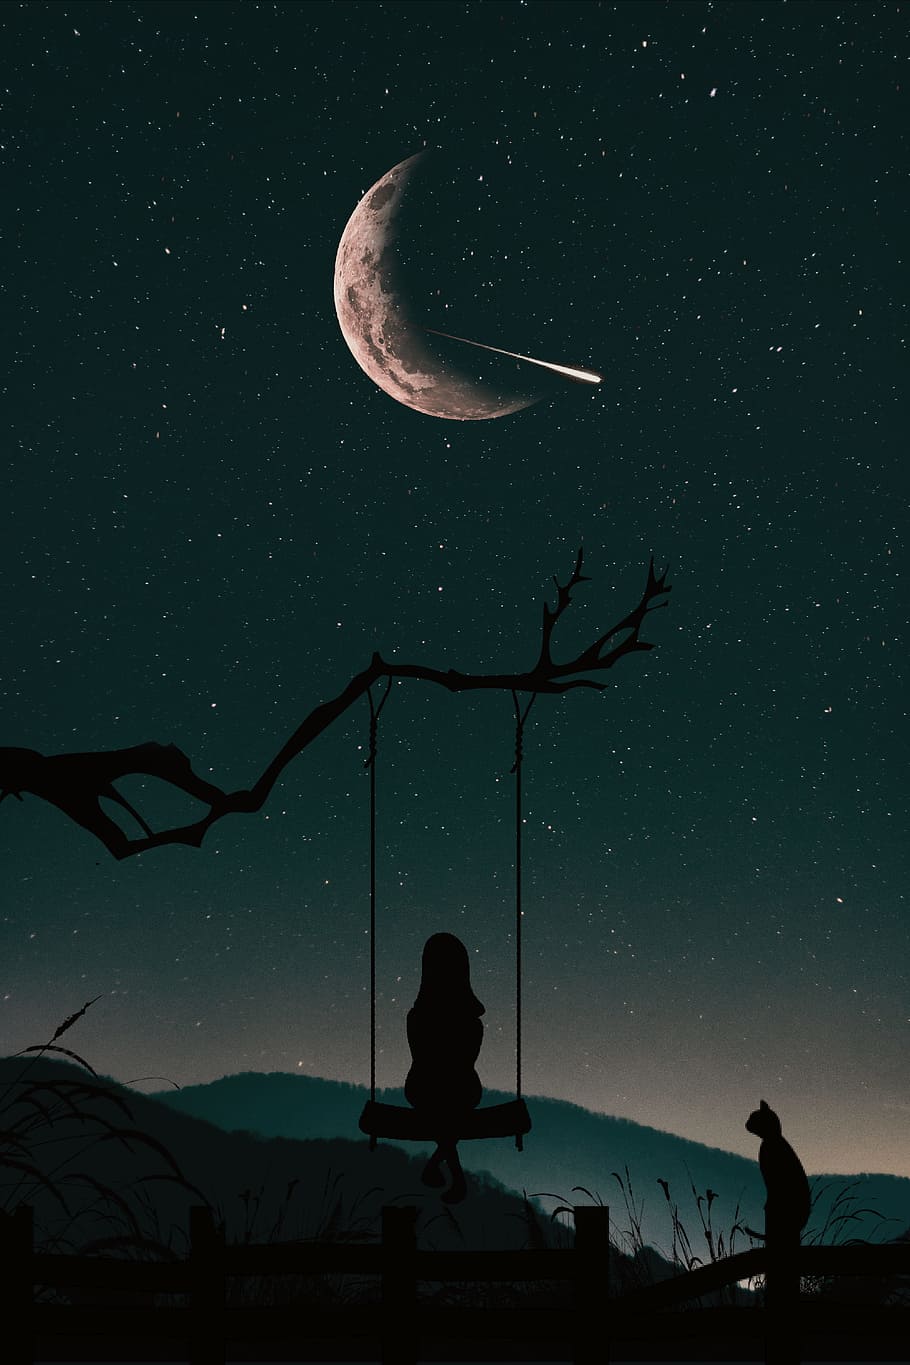 silhouette, girl, sitting, swing, fixed, tree branch, bright, starry night sky, crescent moon illustration, nature